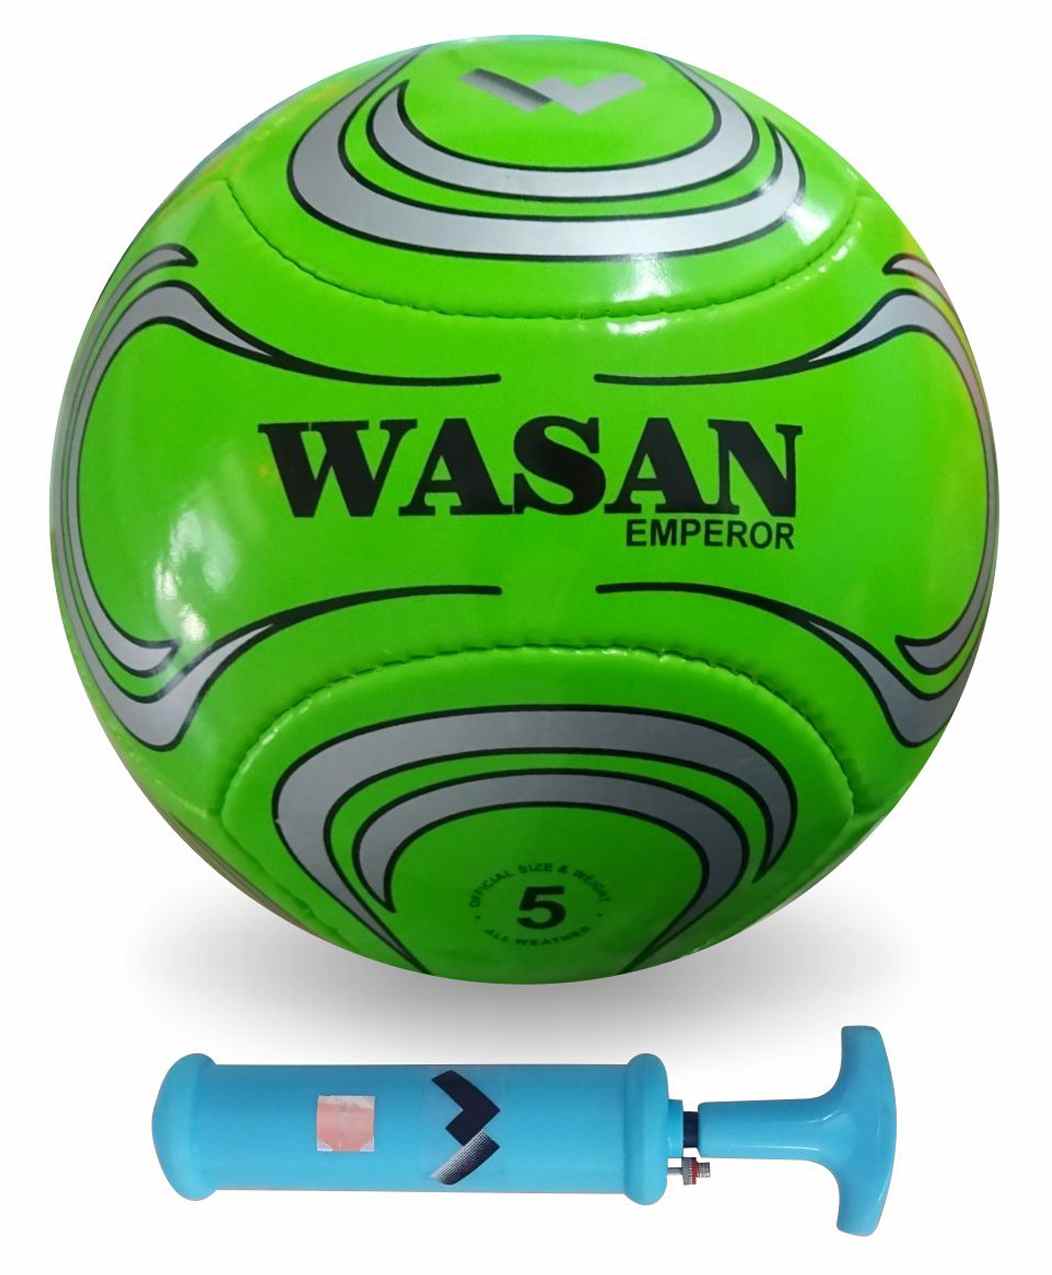 Details about   Wasan Emperor Football Size 5 Green with Free Pump-Ntp 